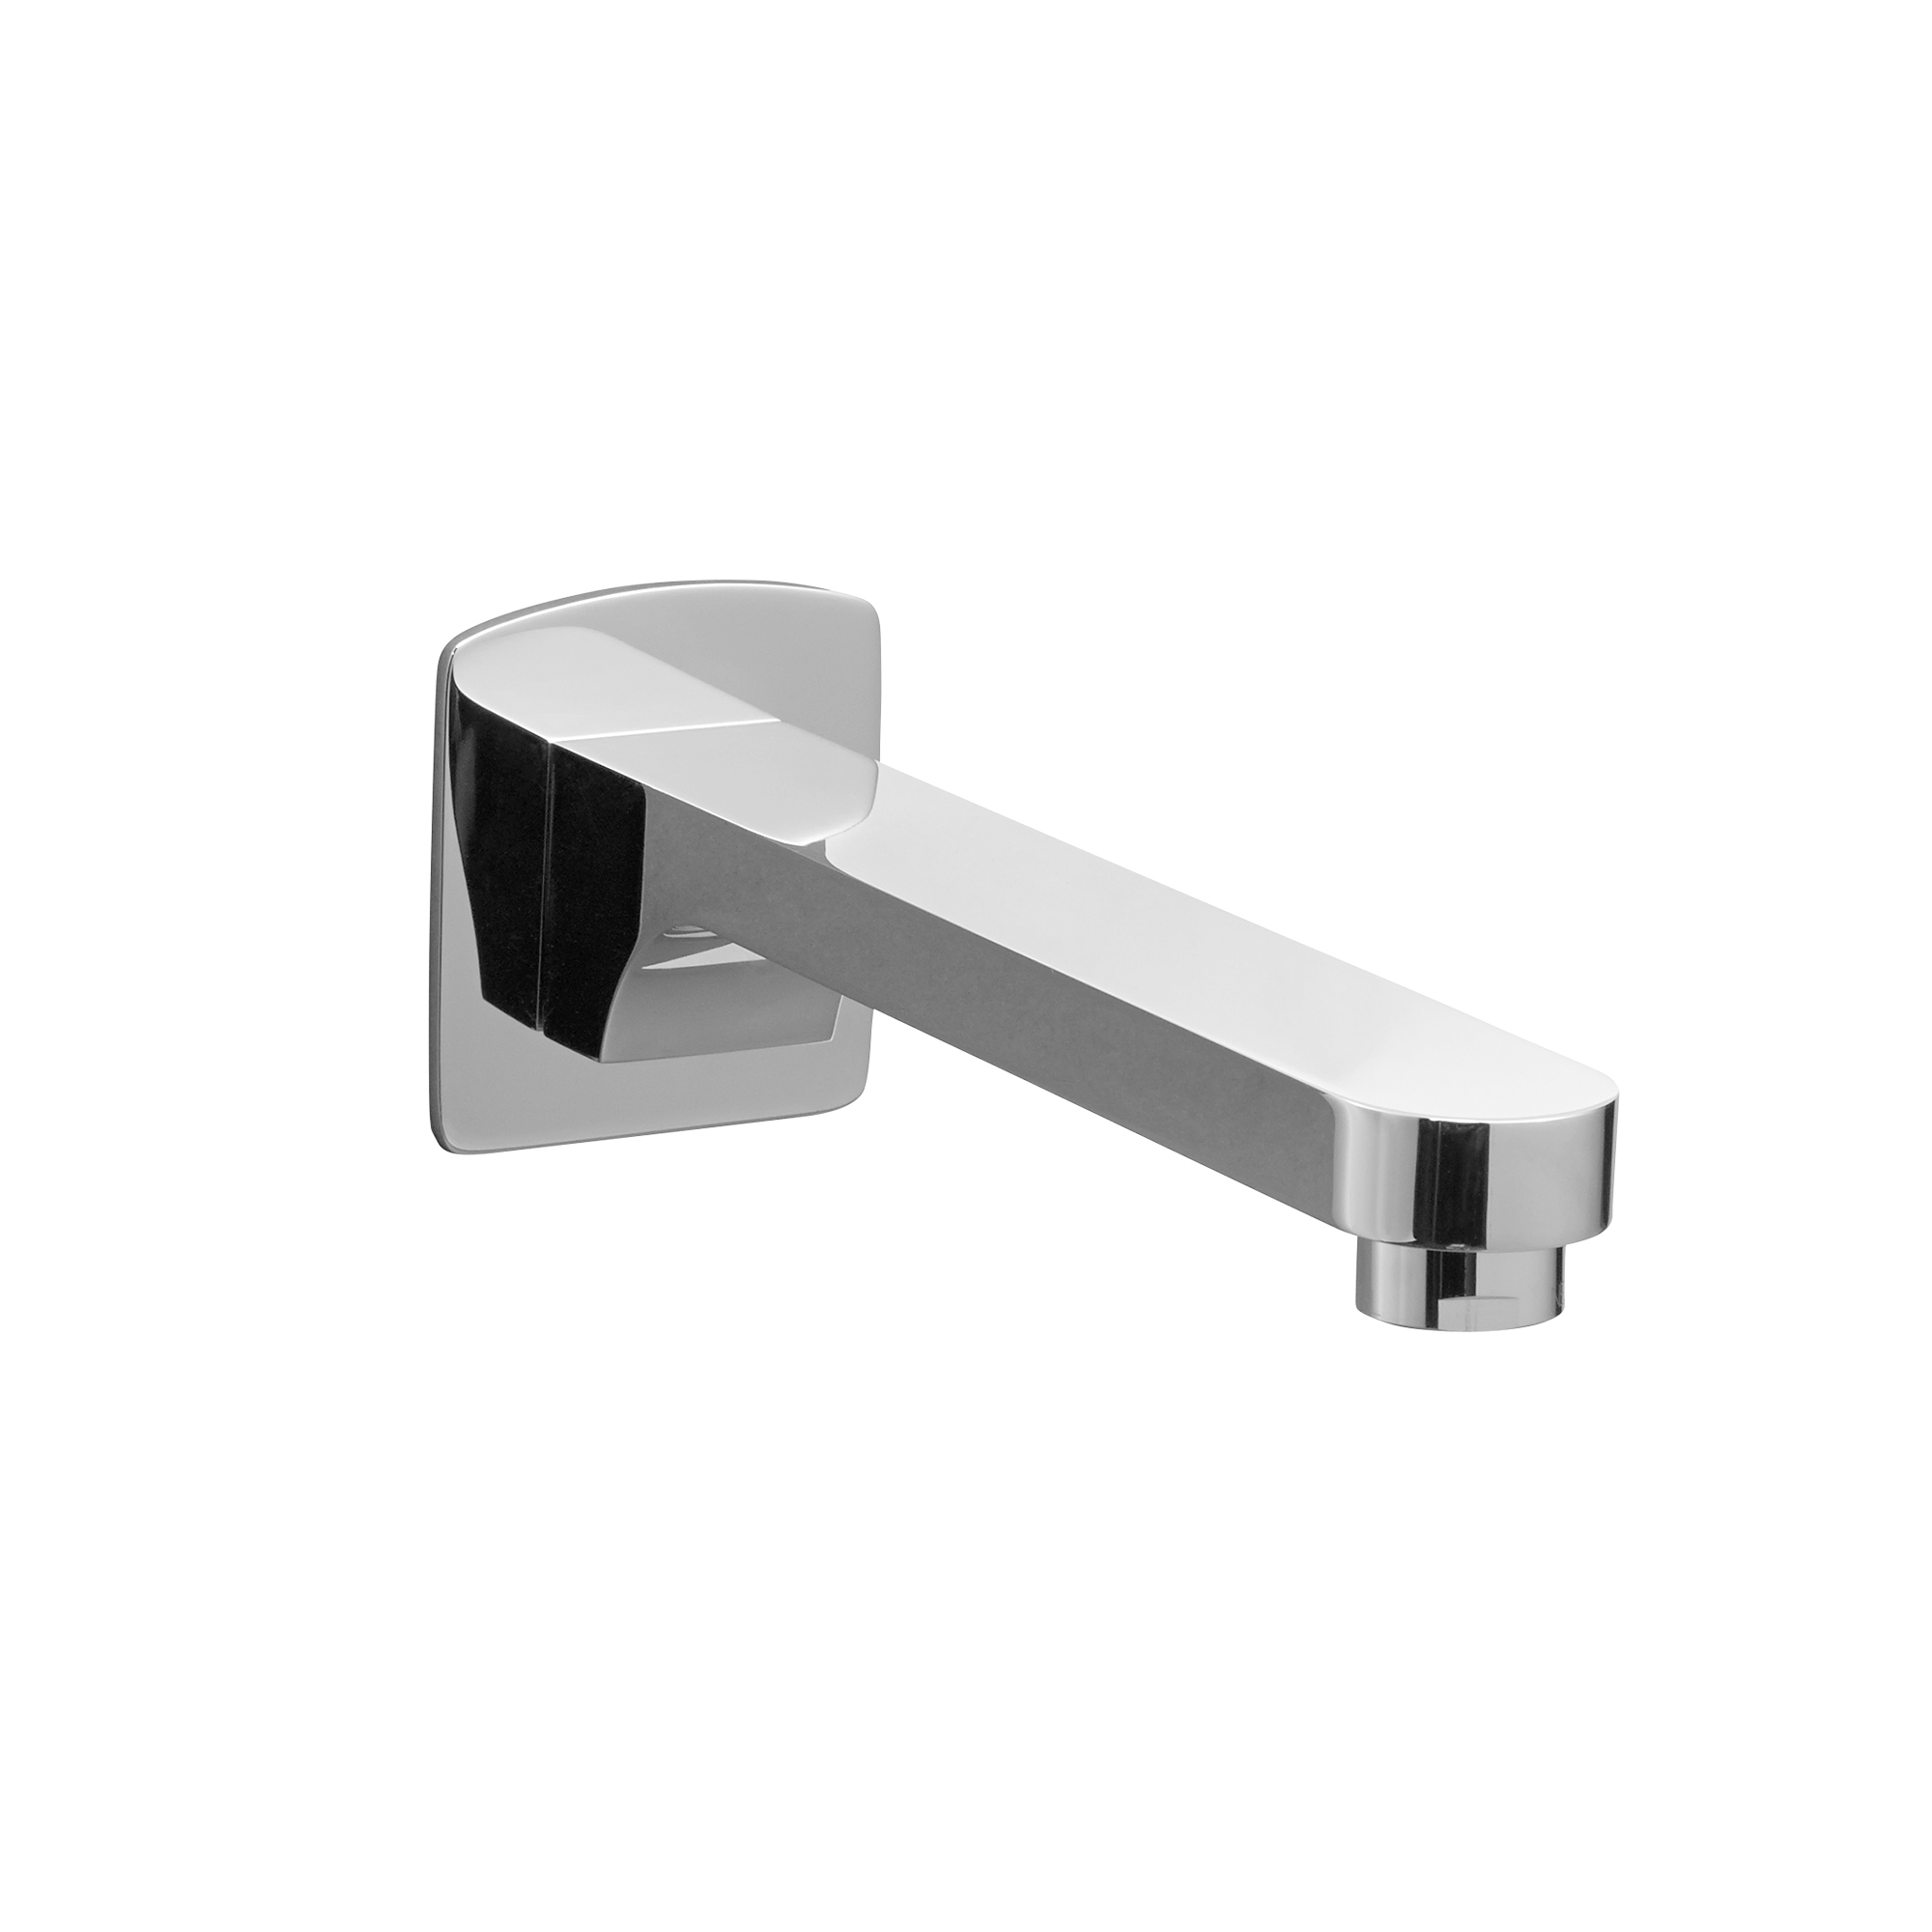 Equility® Wall Mount Bathtub Spout